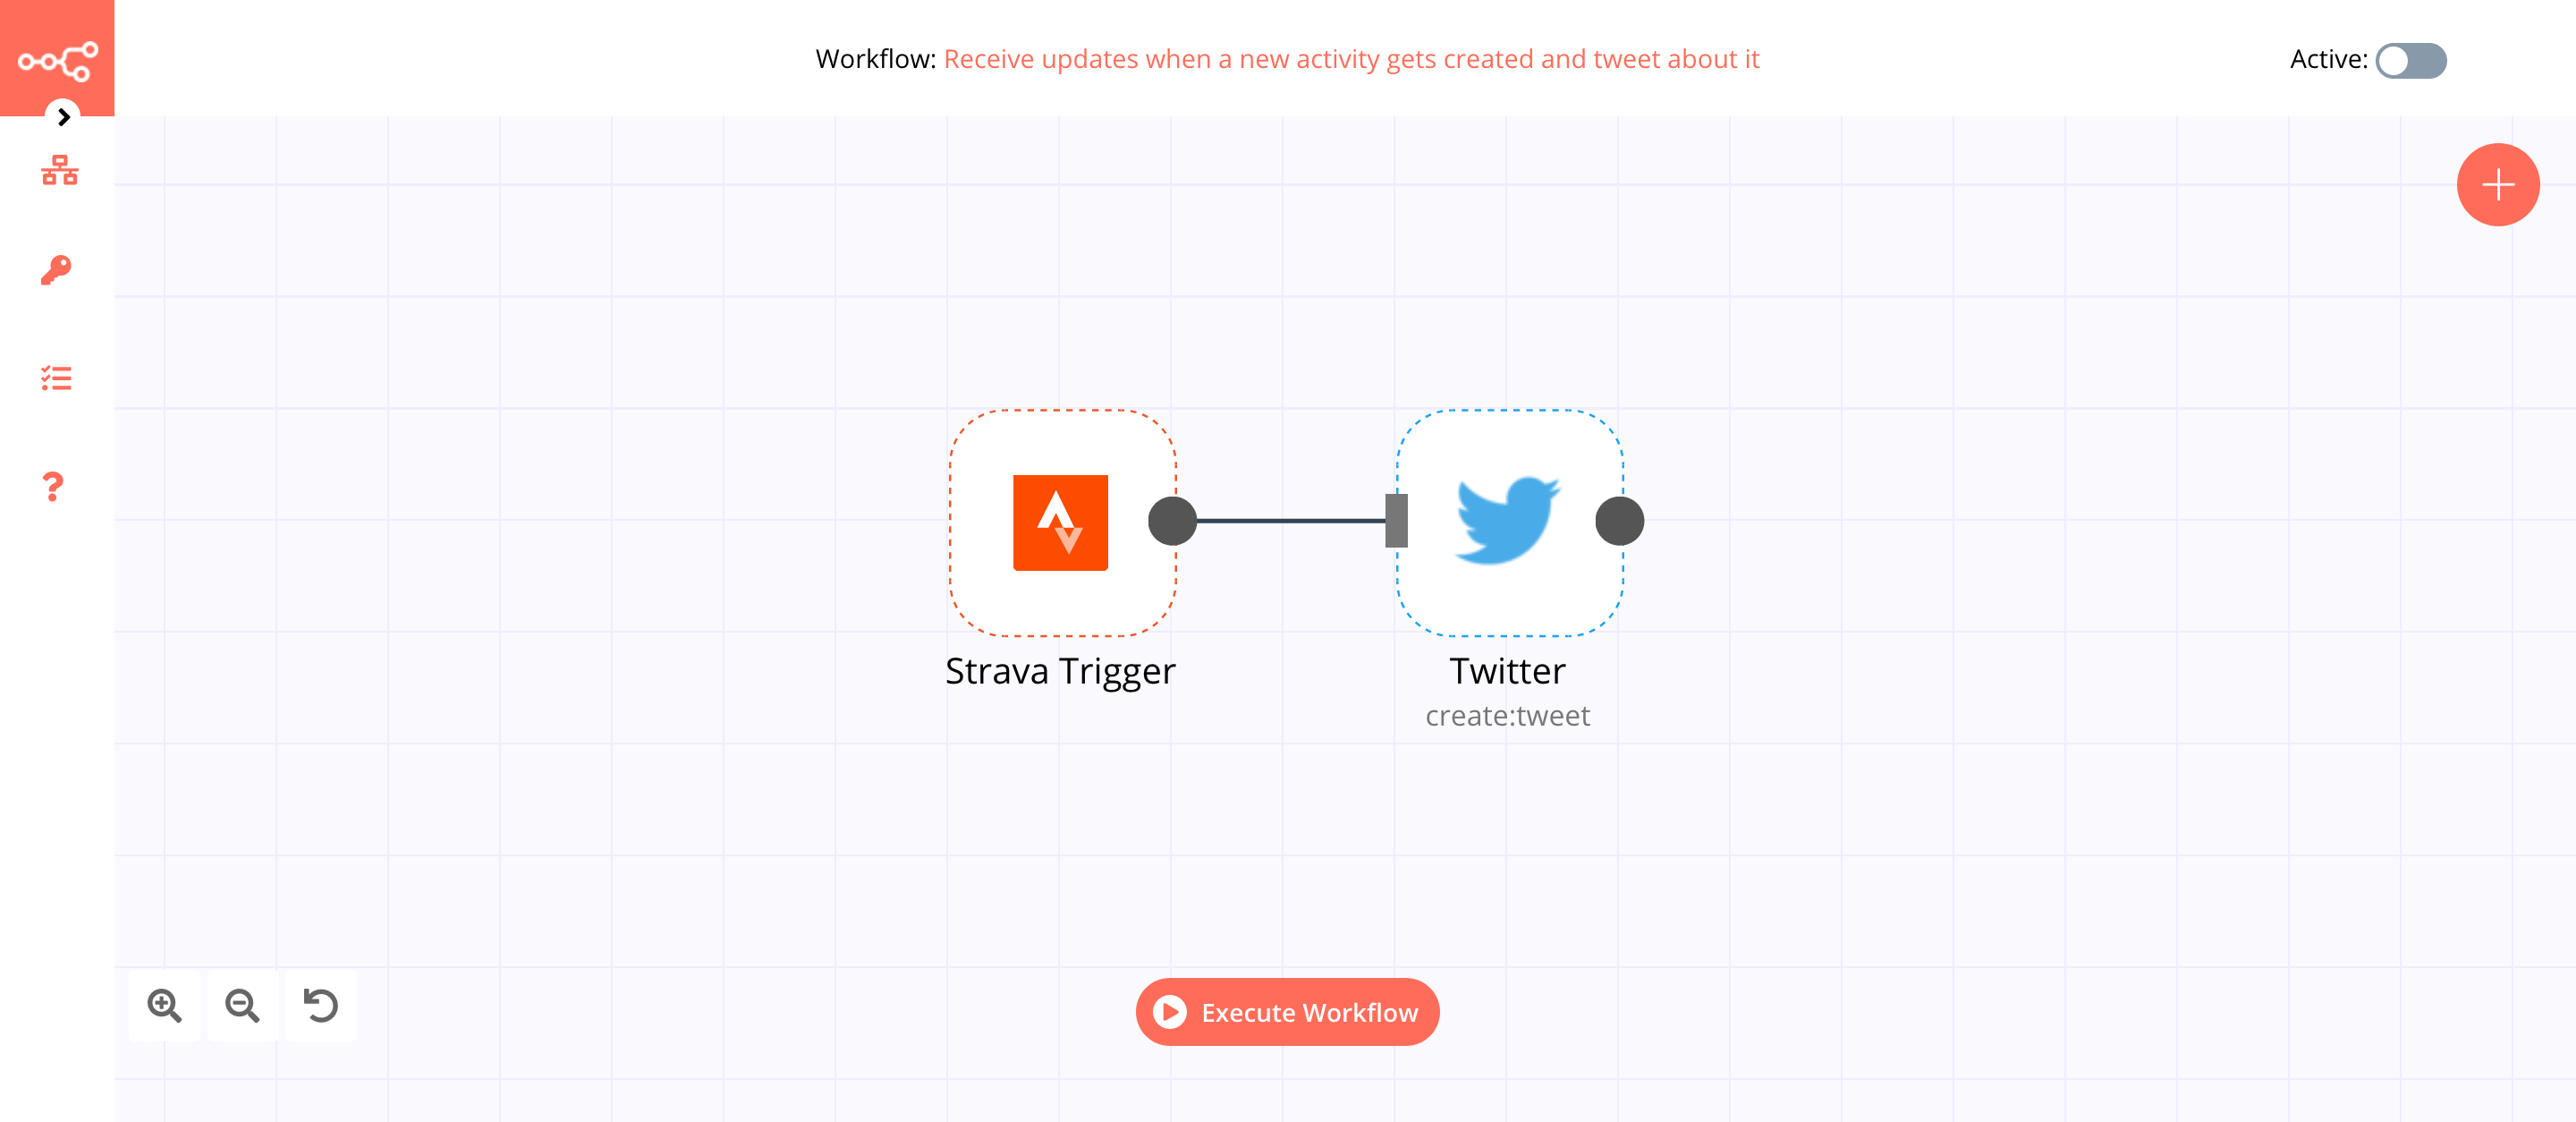 A workflow with the Strava Trigger node